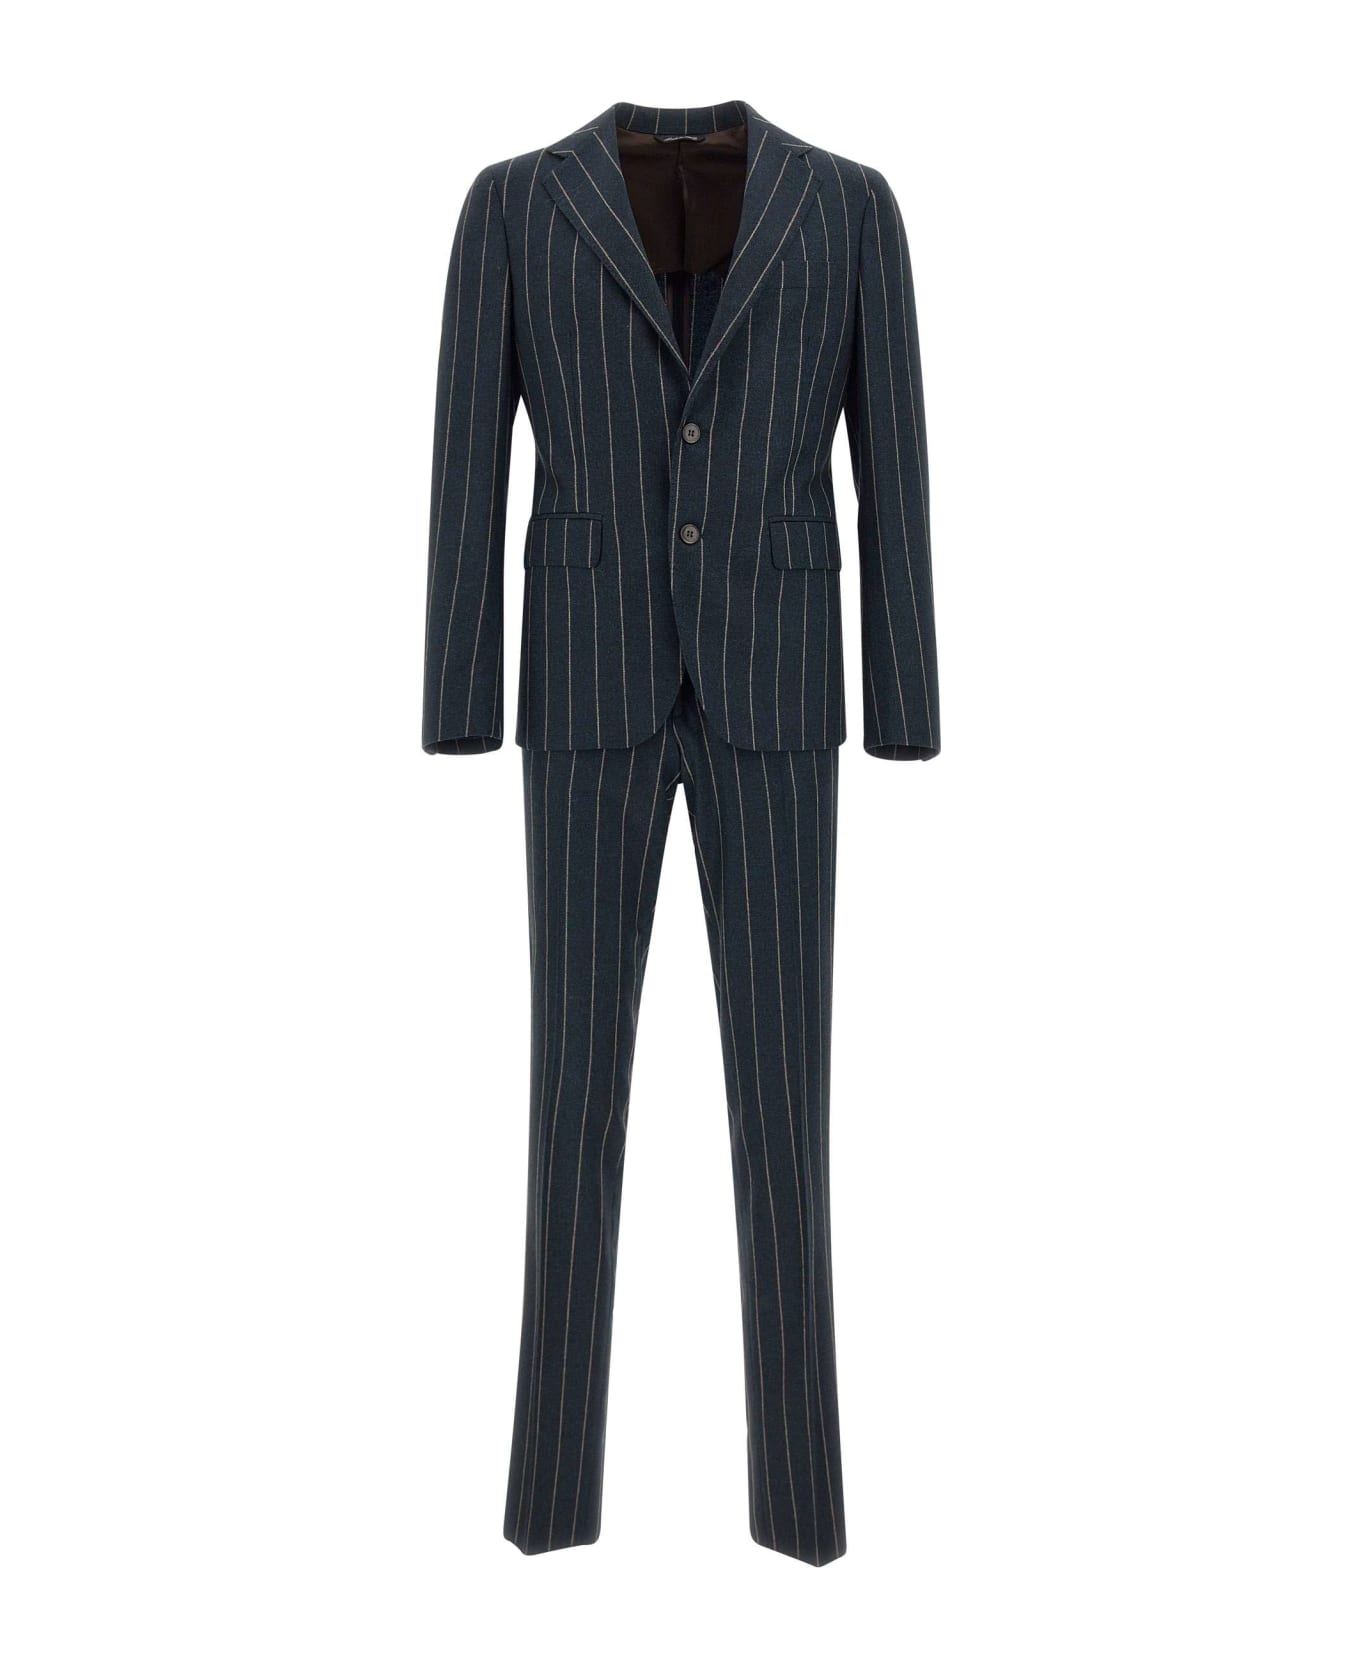 Brian Dales Wool And Cashmere Suit - BLACK スーツ